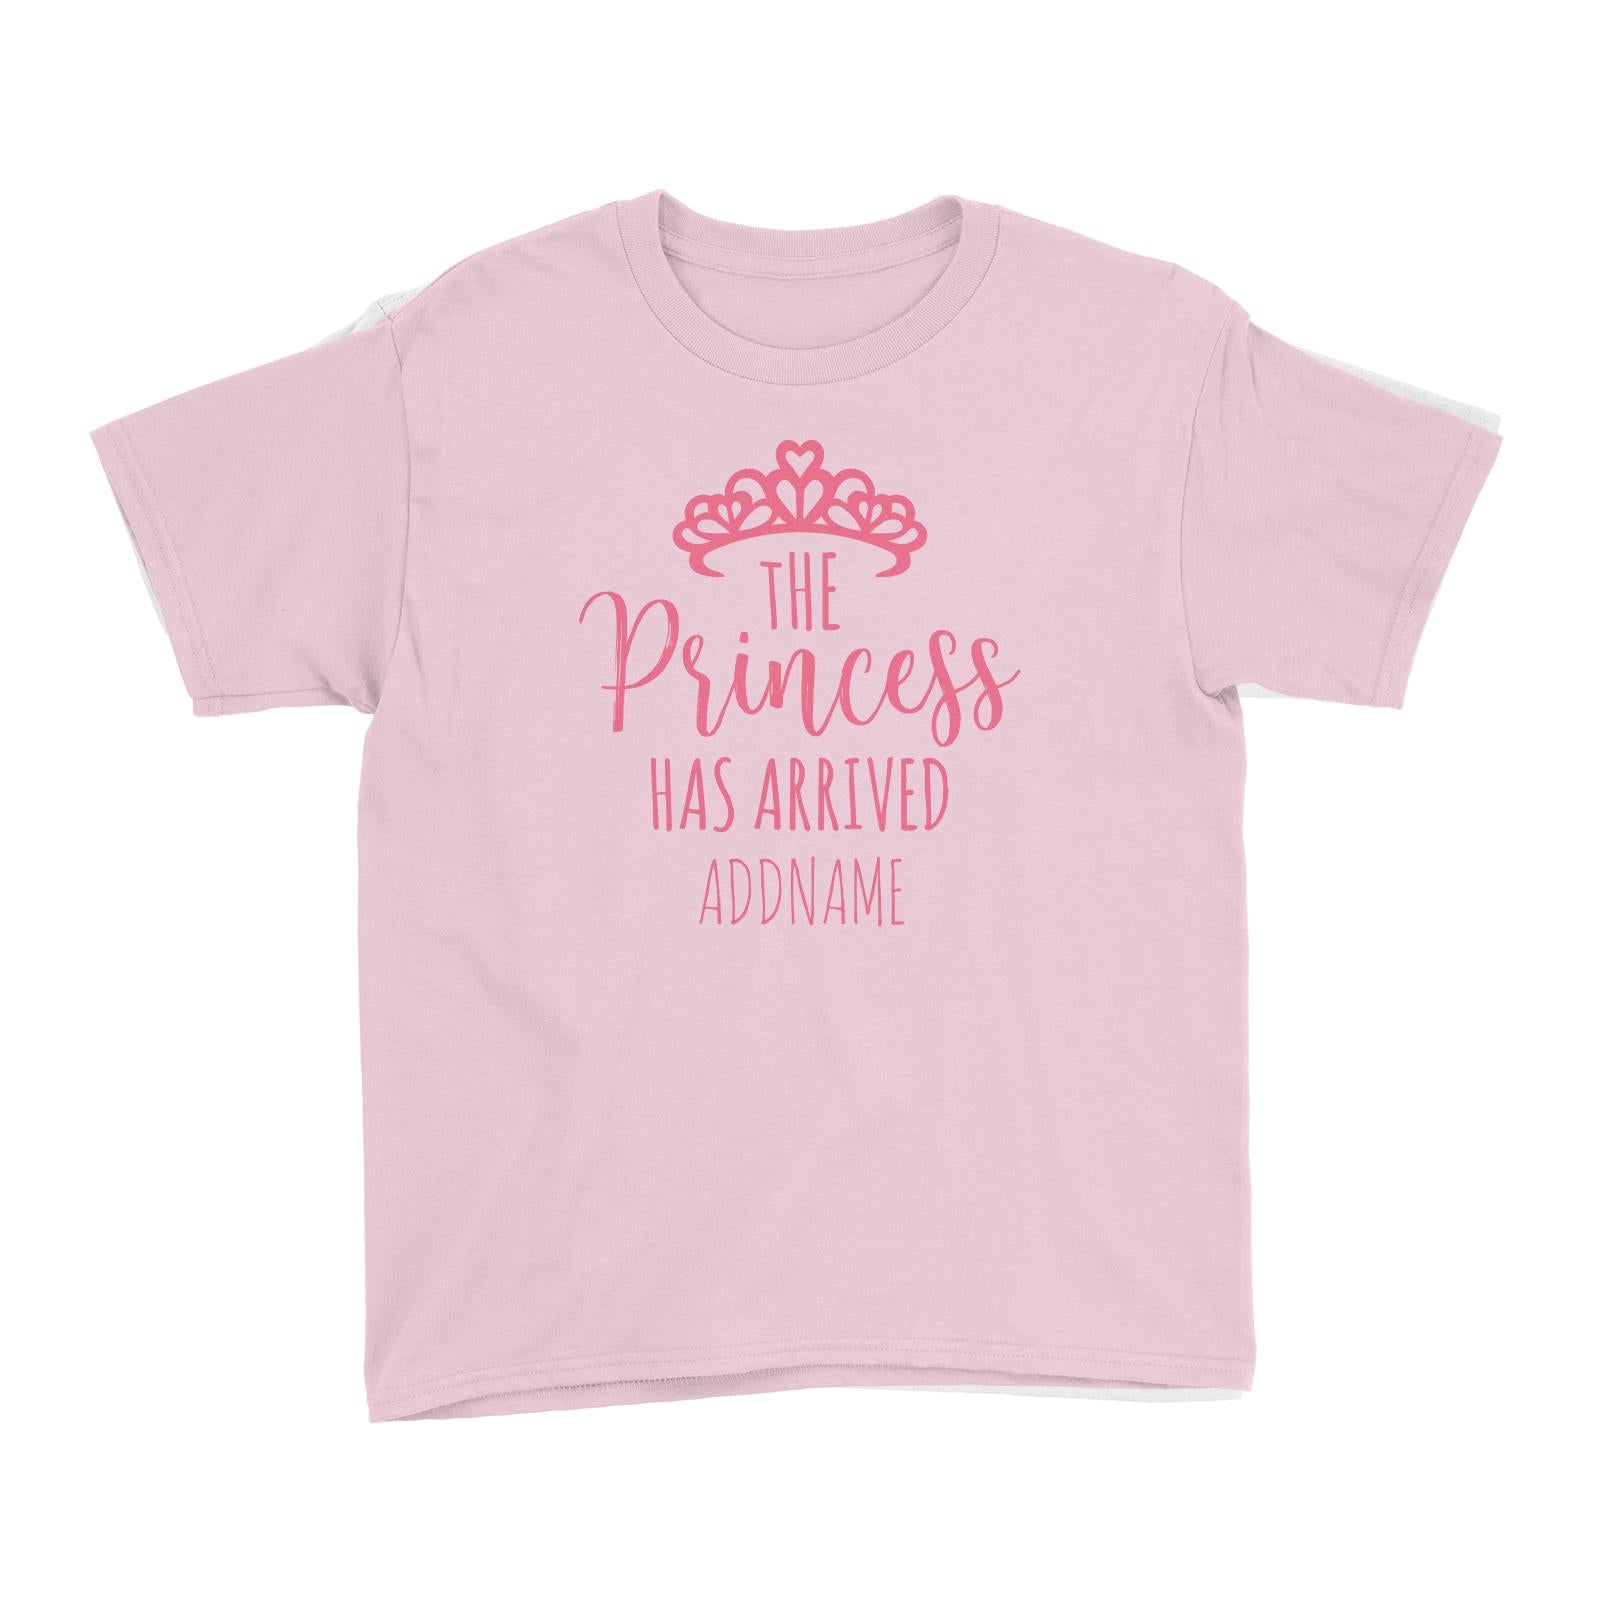 The Princess Has Arrived with Tiara Addname Kid's T-Shirt